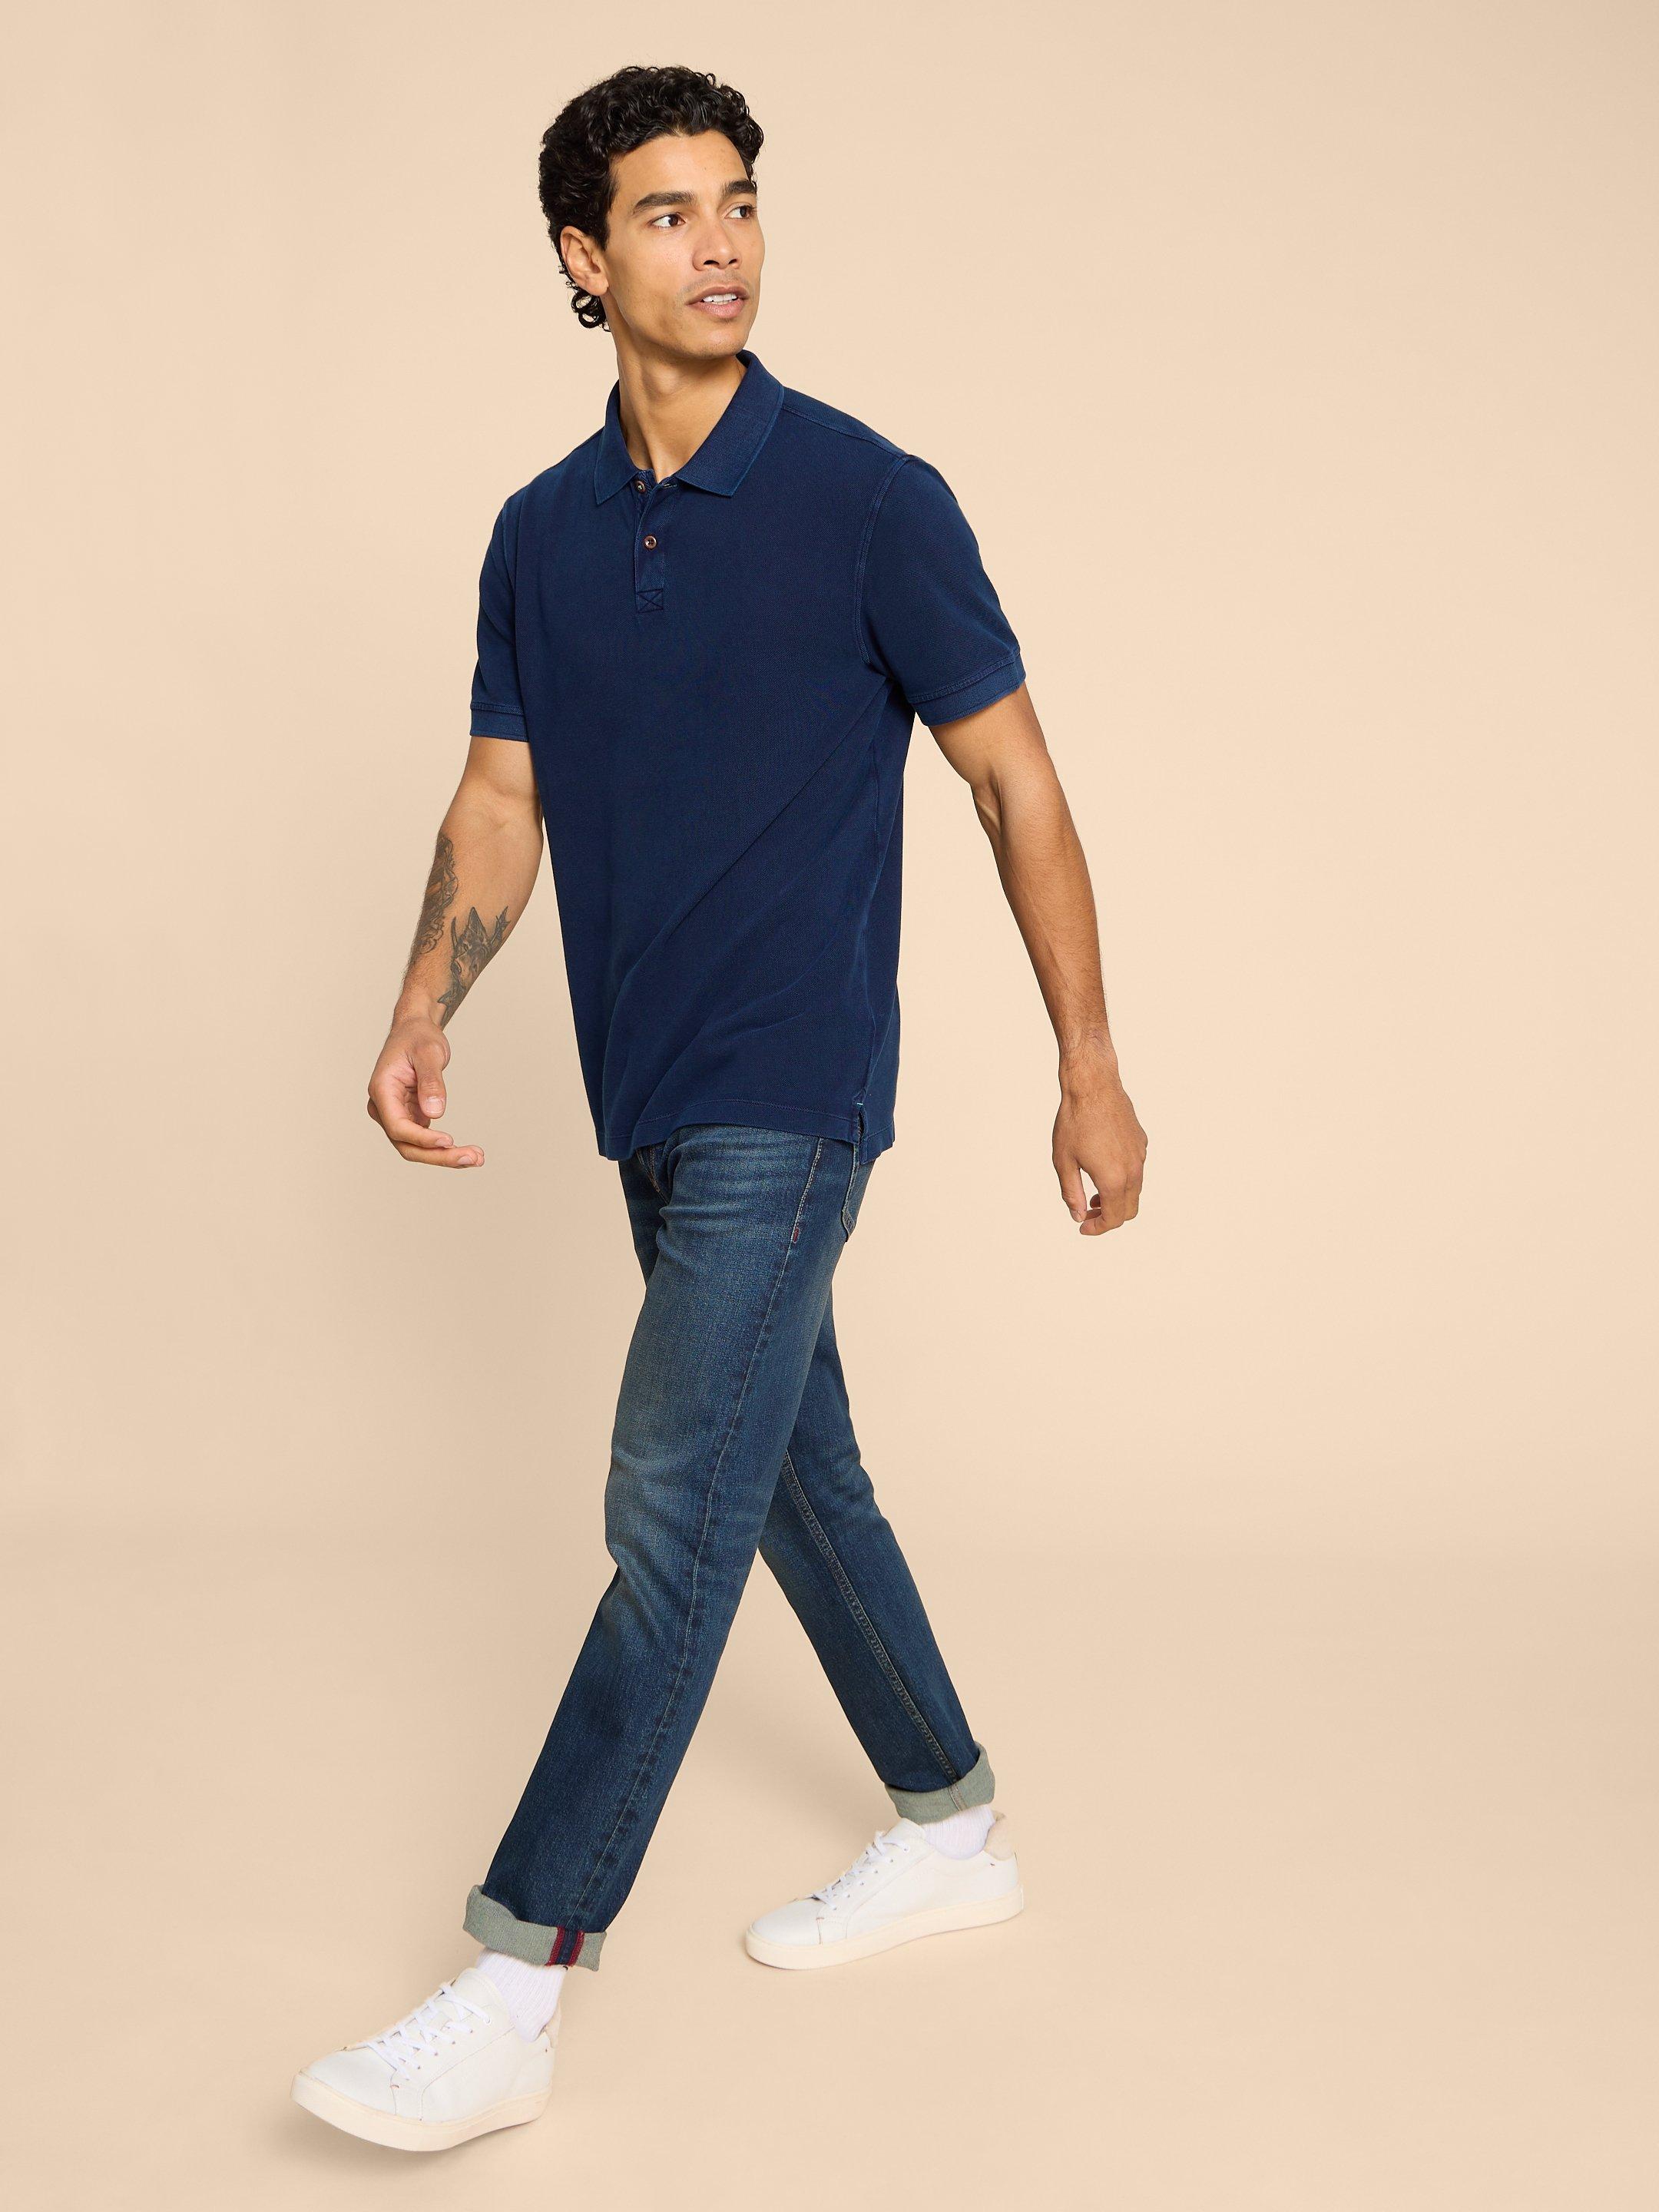 Utility Polo in DEEP BLUE - LIFESTYLE